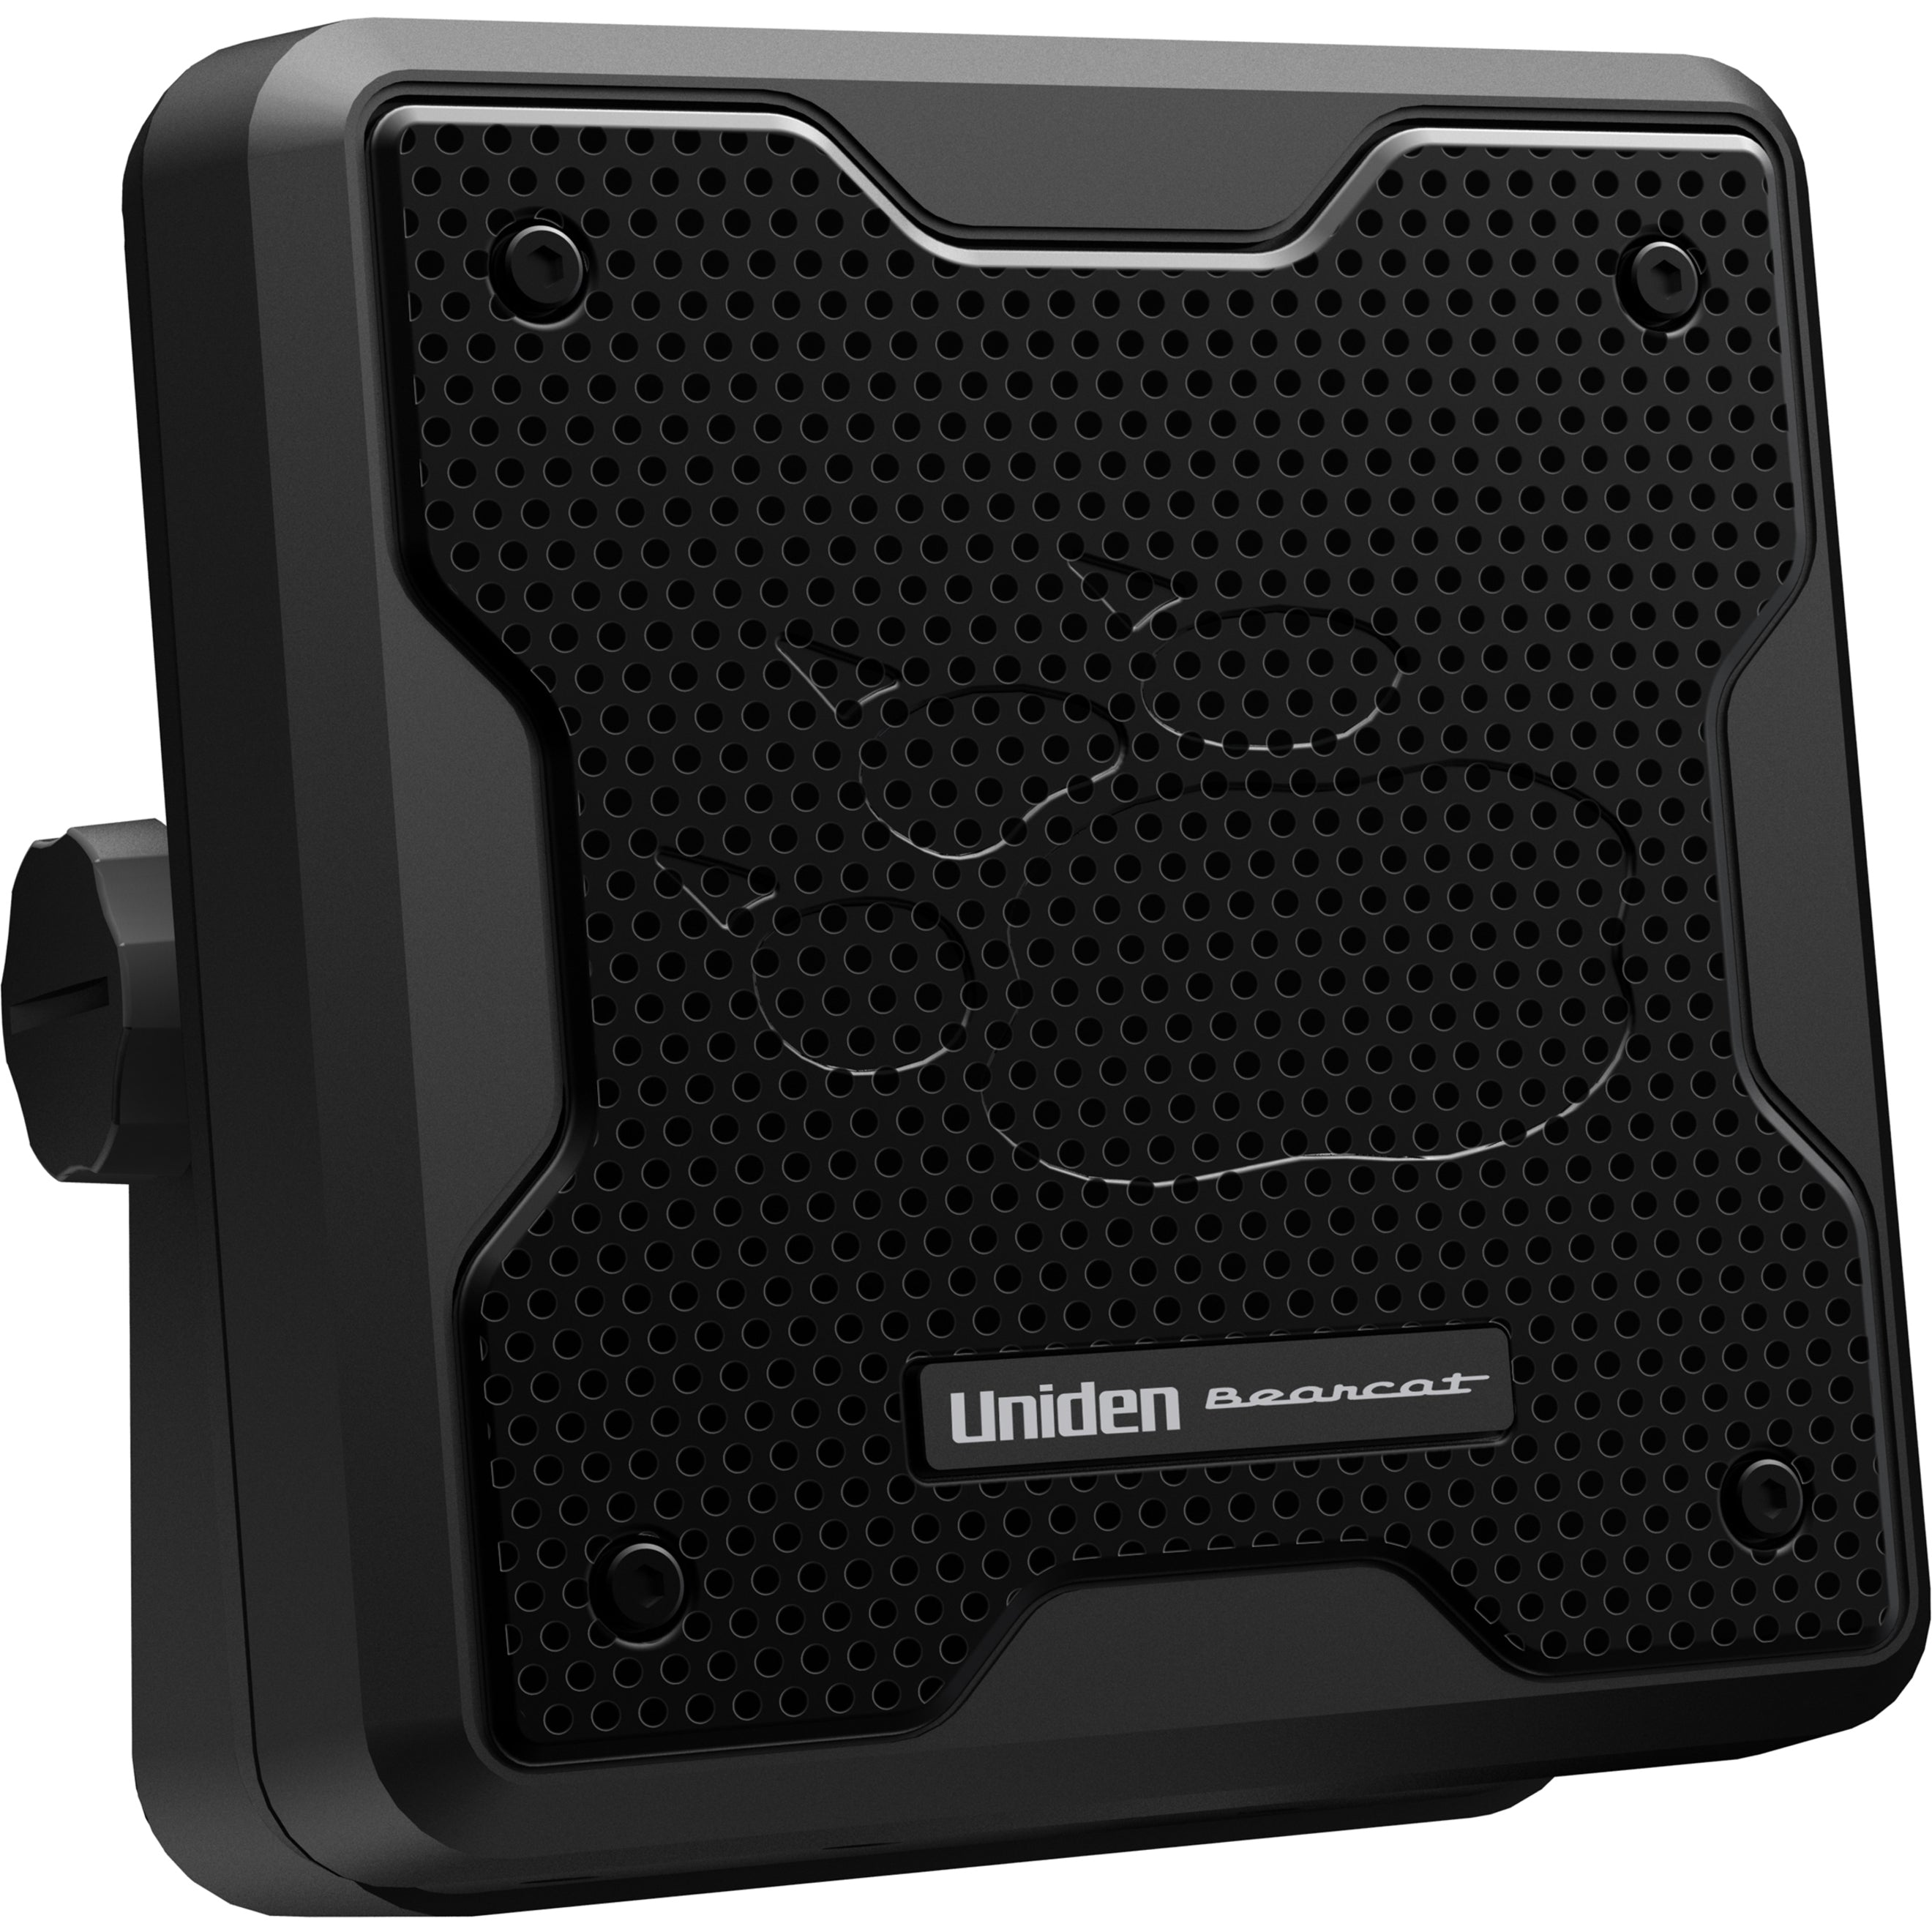 Uniden BC20 External Speaker, 20W RMS, Clear Sound for Enhanced Audio Experience